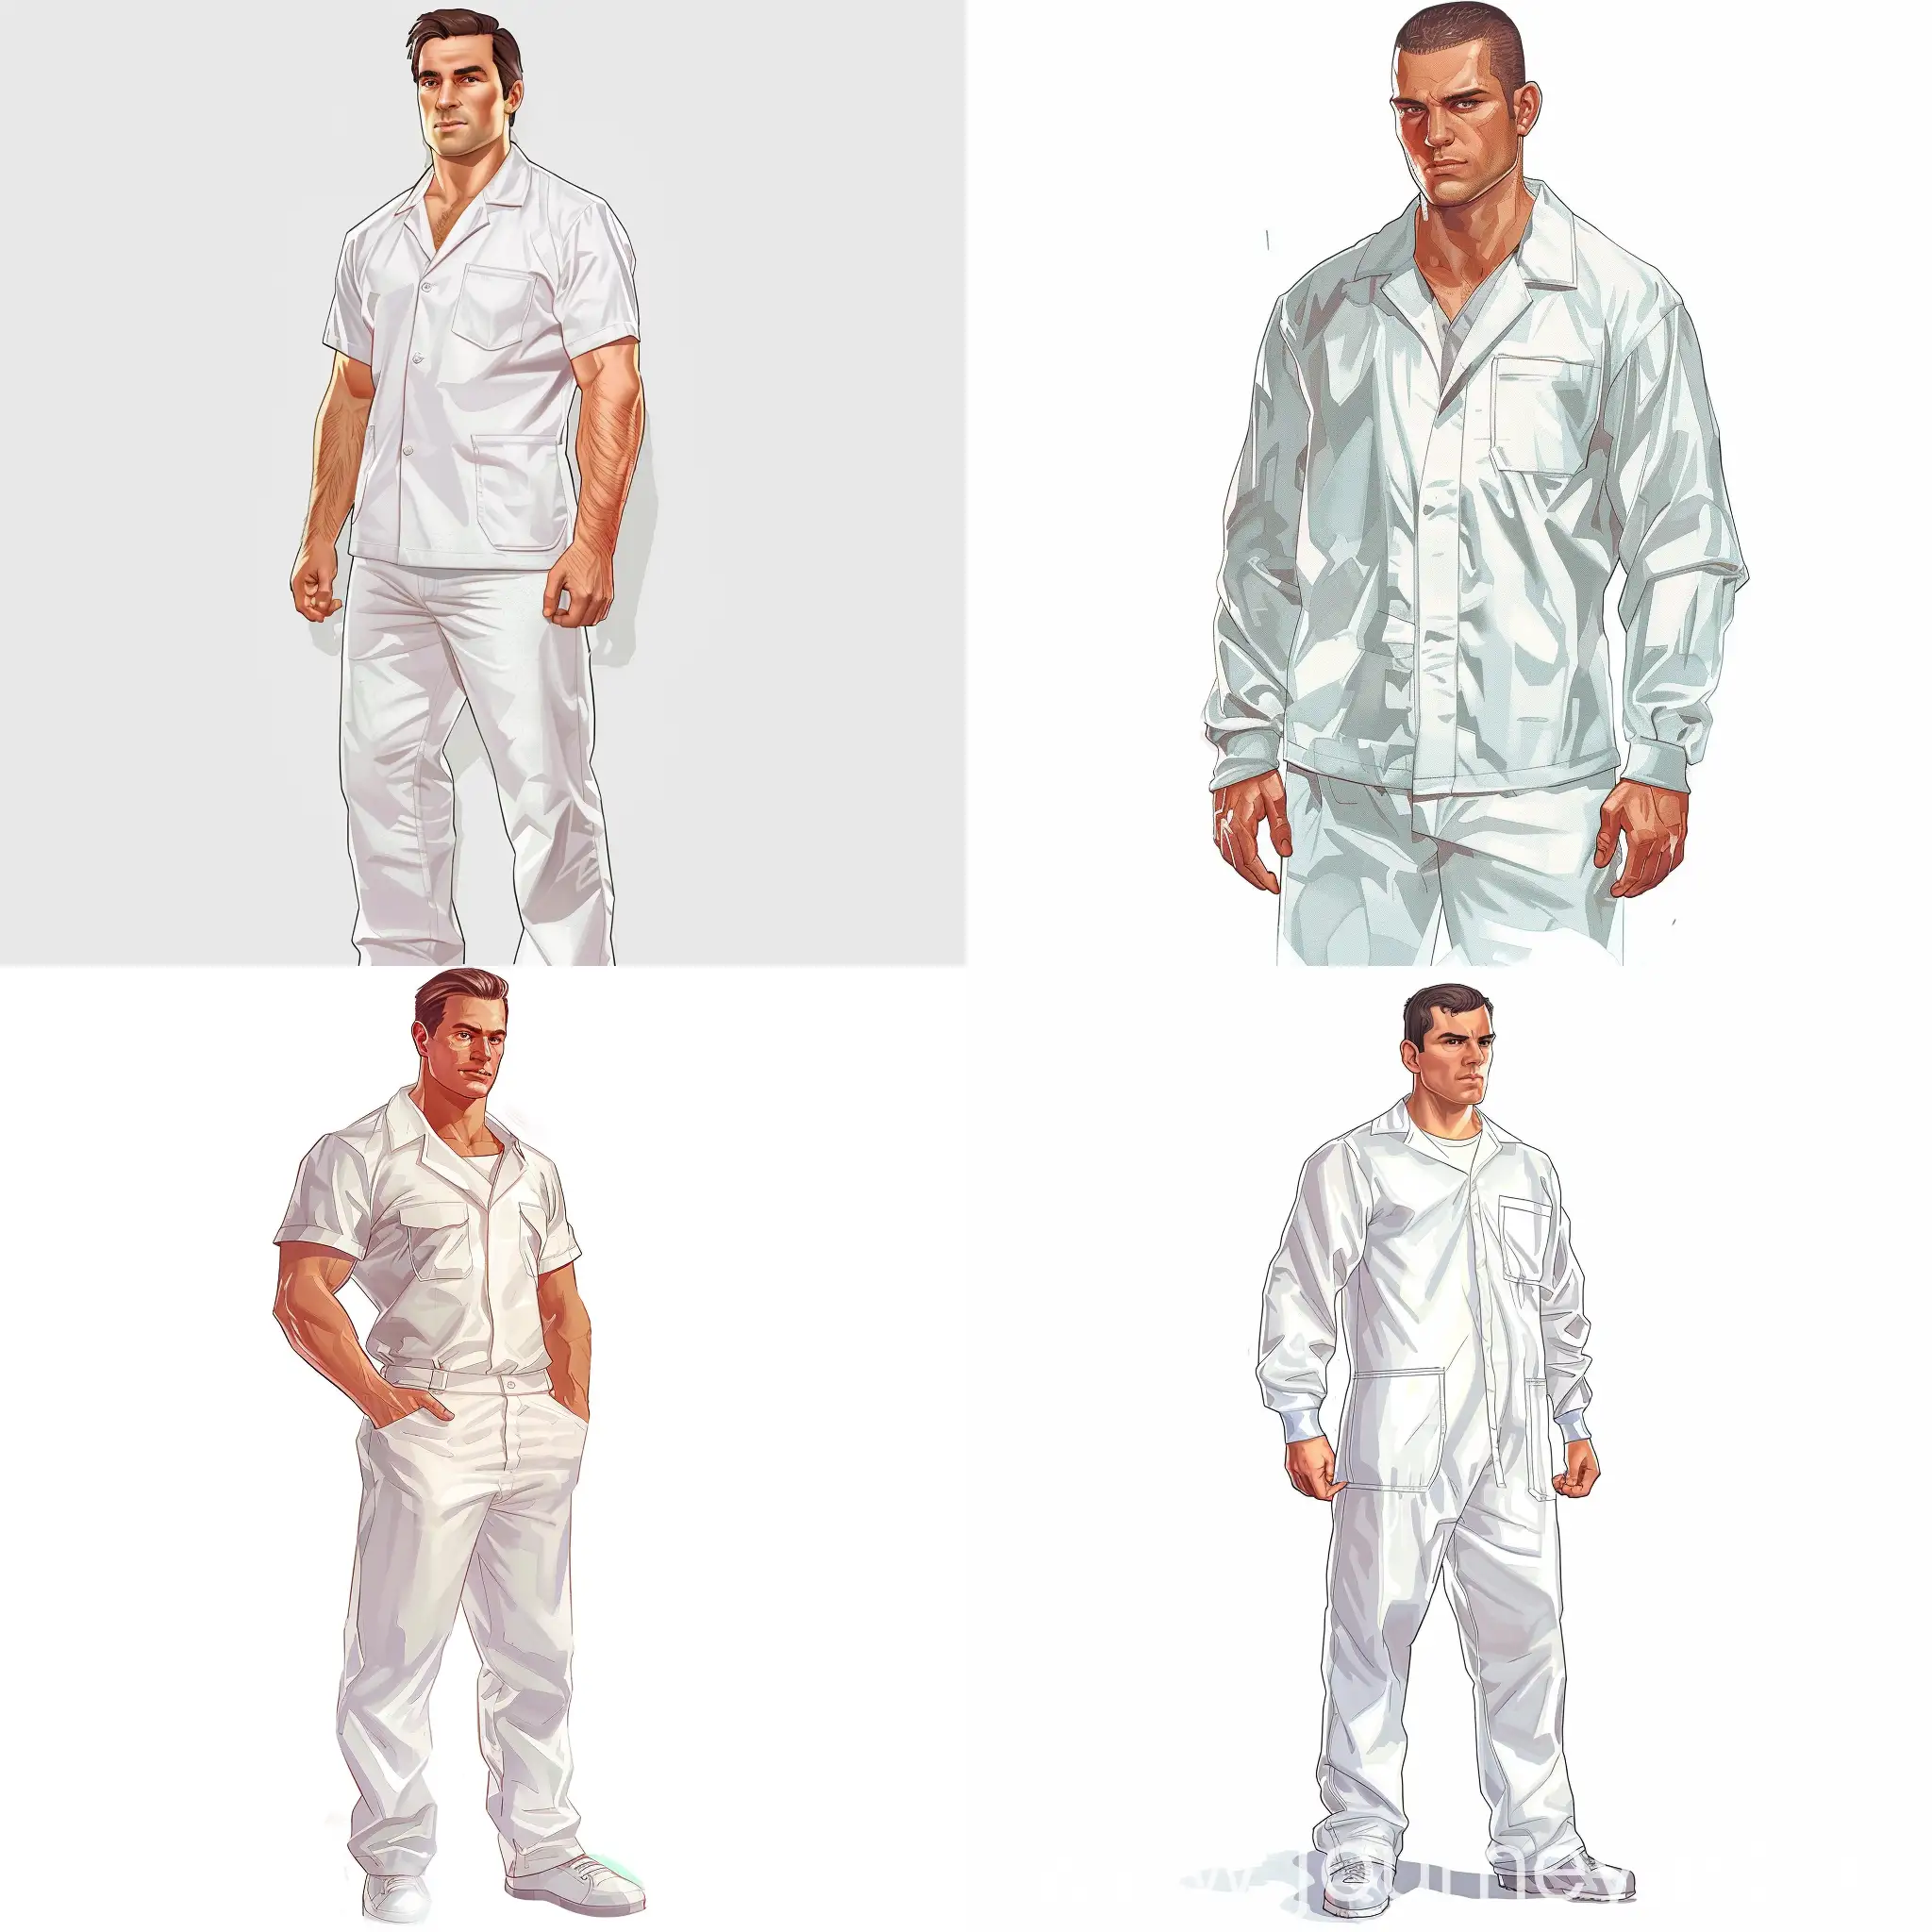 Draw a handsome young surgeon in a full-length white uniform. A drawing in the style of the GTA 5 computer game. The background is white.